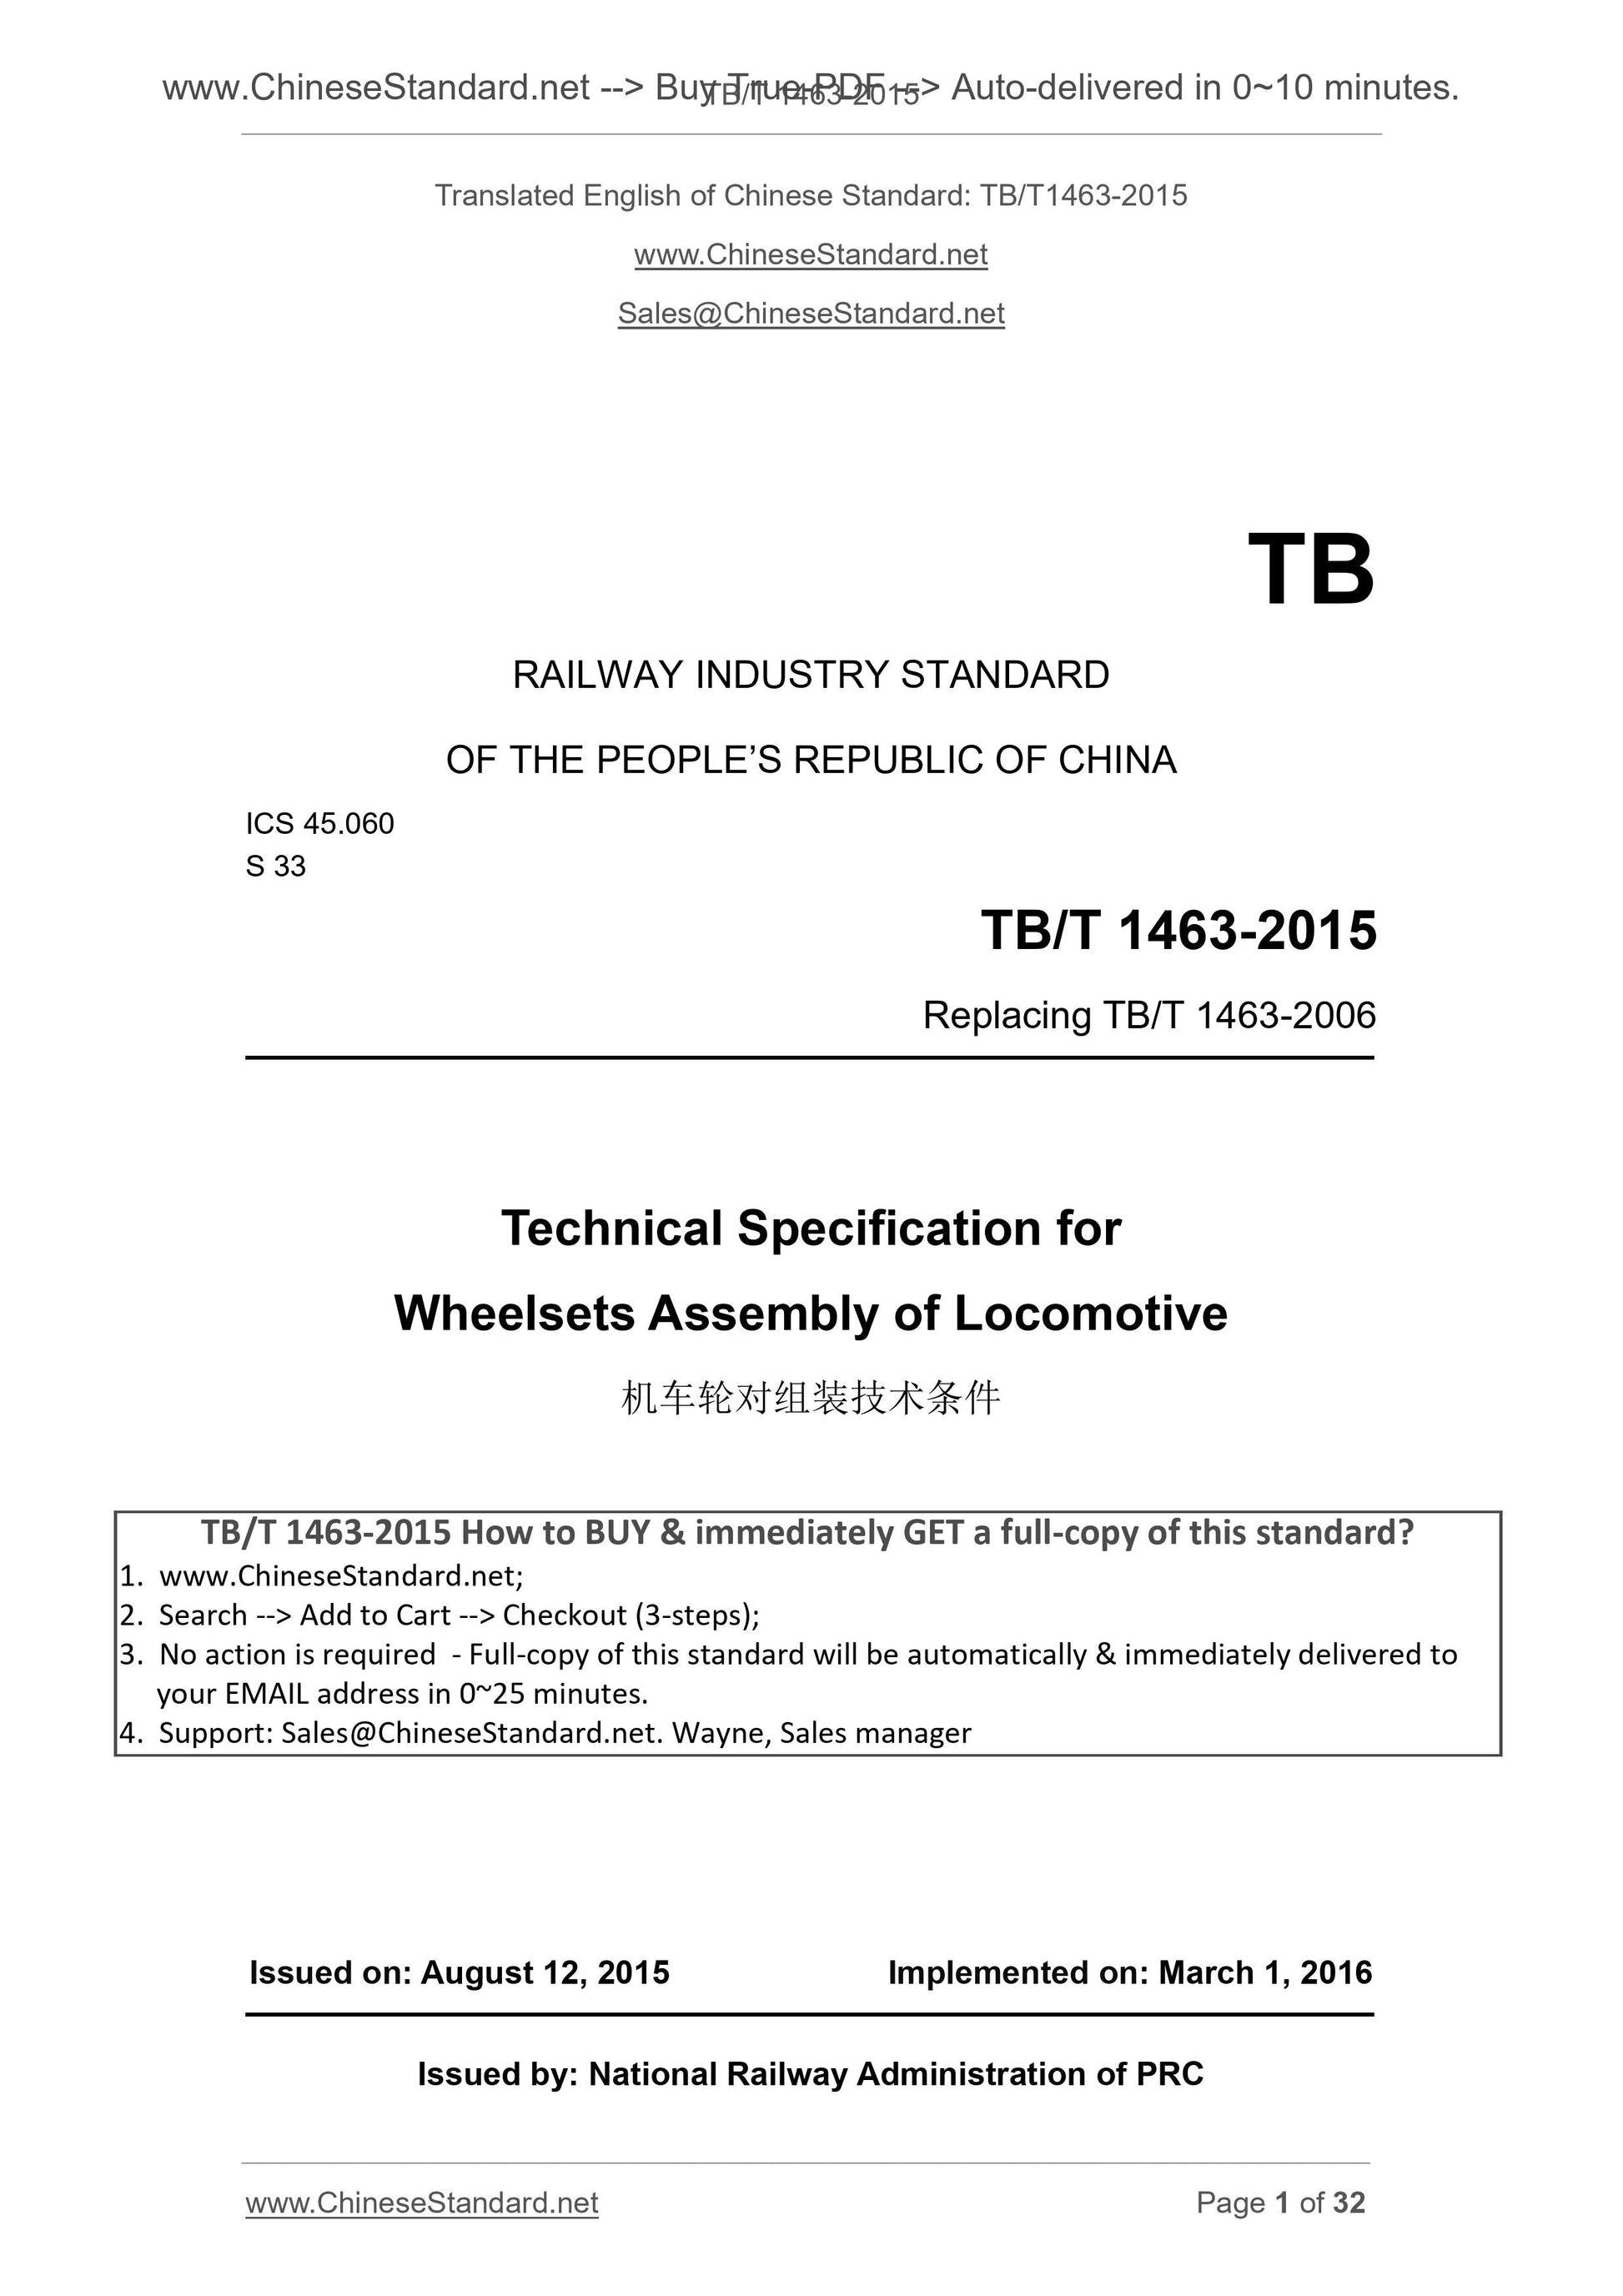 TB/T 1463-2015 Page 1